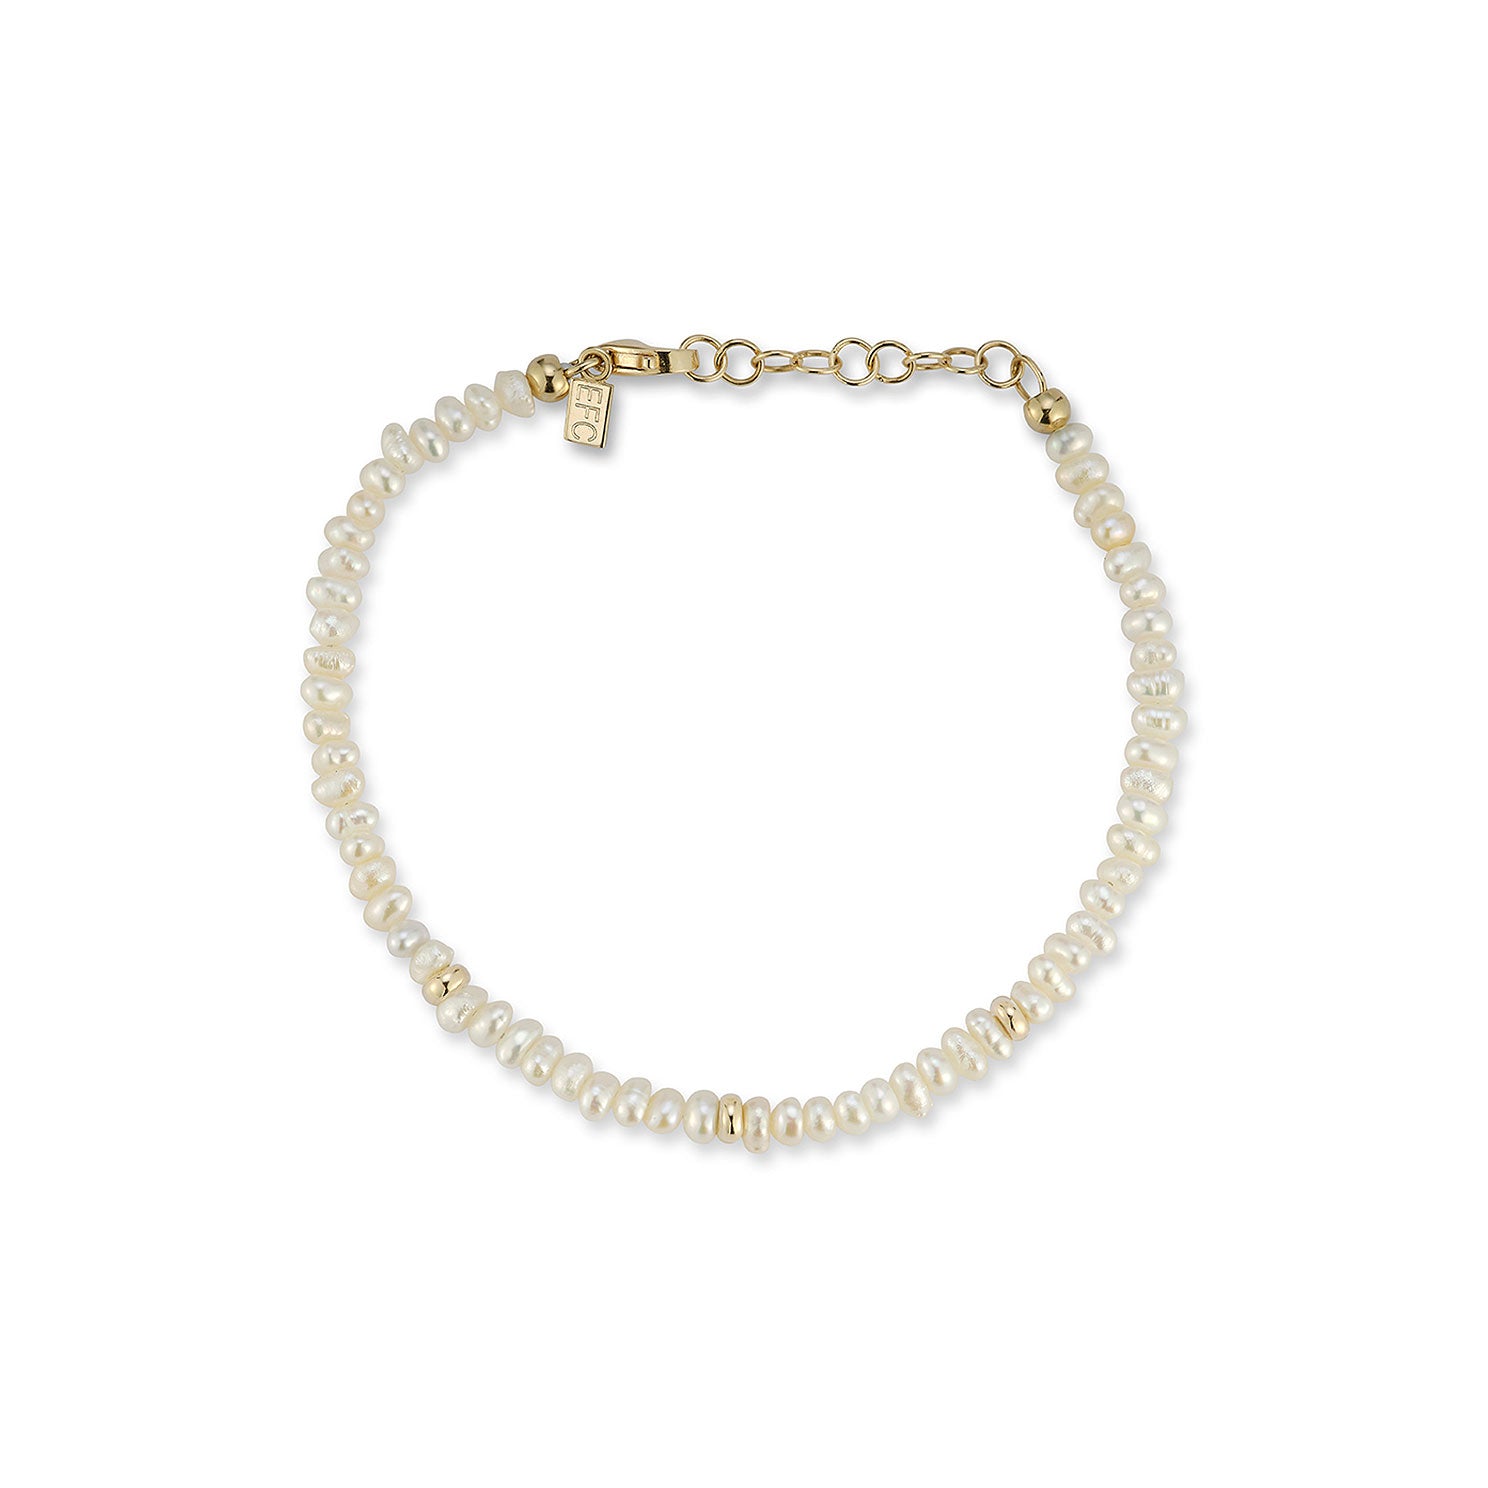 Birthstone Bead Bracelet In Pearl with 14k yellow gold chain